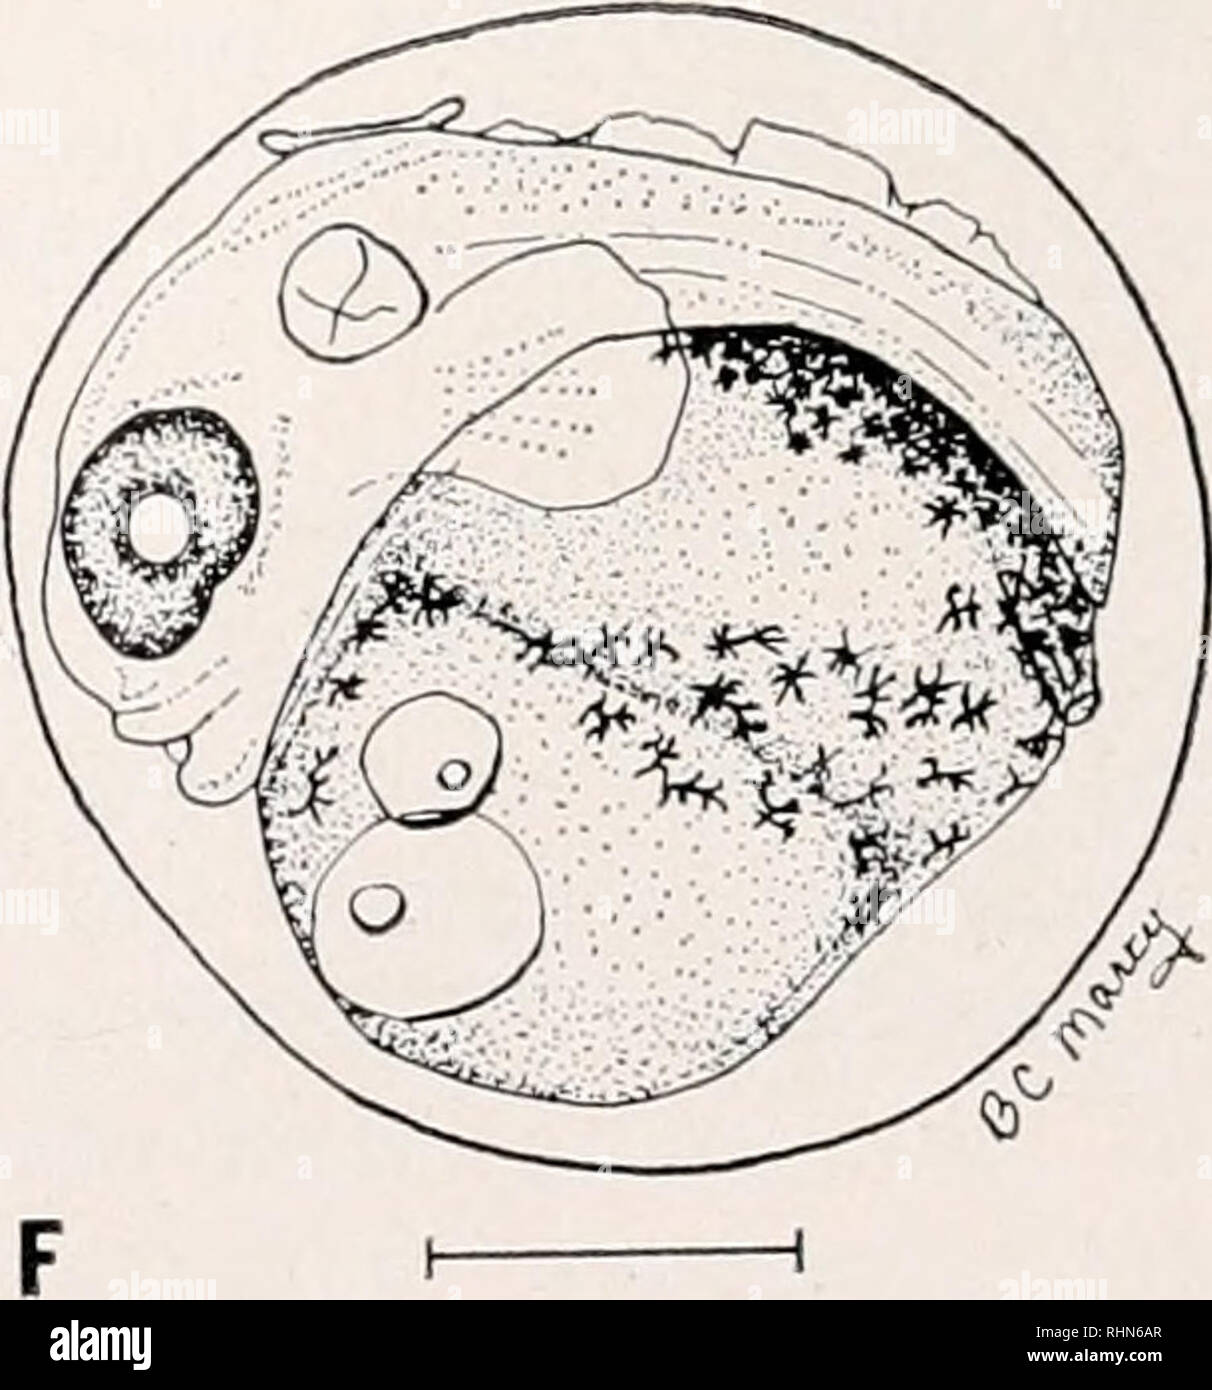 . The Biological bulletin. Biology; Zoology; Biology; Marine Biology. FIGURE 3. Later development of the eggs of the grubby, Myoxocephalus aenaeus, artificially propagated in the laboratory: A) developing embryo, 1.60 mm (325 hr—13.5 days); B) de- veloping embryo, 1.57 mm (350 hr—14.6 days) ; C) developing embryo, 1.60 mm (415 hr— 17.3 days) ; D) developing embryo, 1.67 mm (552 hr—23 days) ; E) late developing embryo, 1.60 mm (605 hr—25.2 days) ; F) late developing embryo, 1.60 mm (725 hr—30.2 days), scale = 0.5 mm. Measurements refer to mean egg capsule diameters.. Please note that these imag Stock Photo